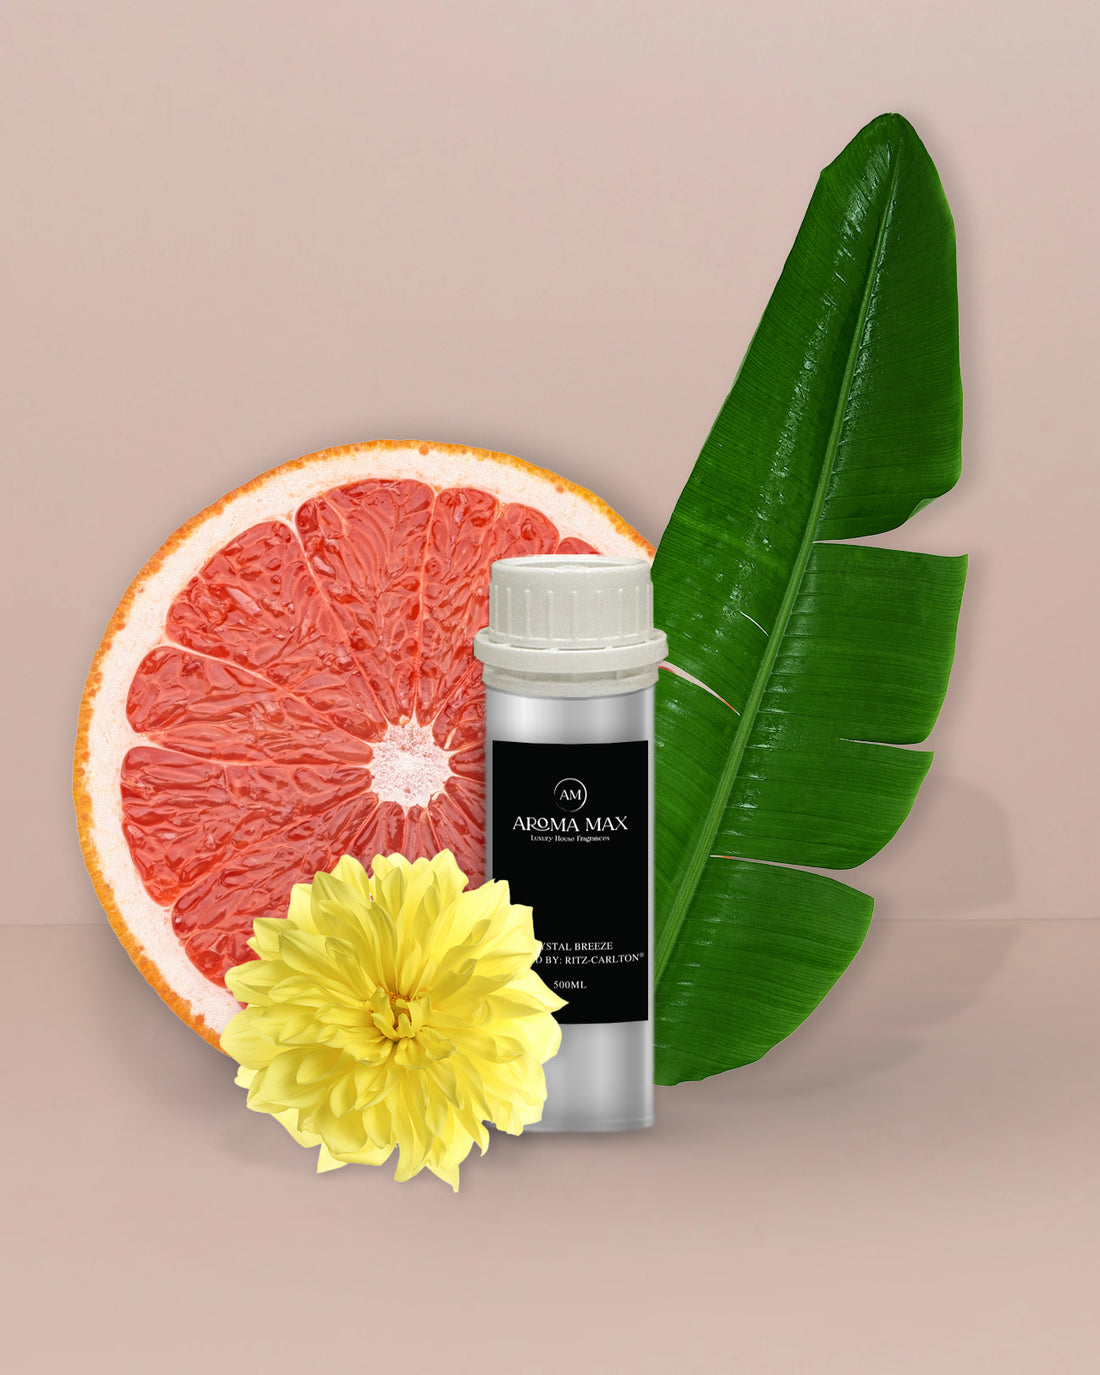 Crystal Breeze Fragrance Oil Inspired by: Ritz-Carlton®  Top Note = Grapefruit, Middle Note = Violet, Base Note = Musk